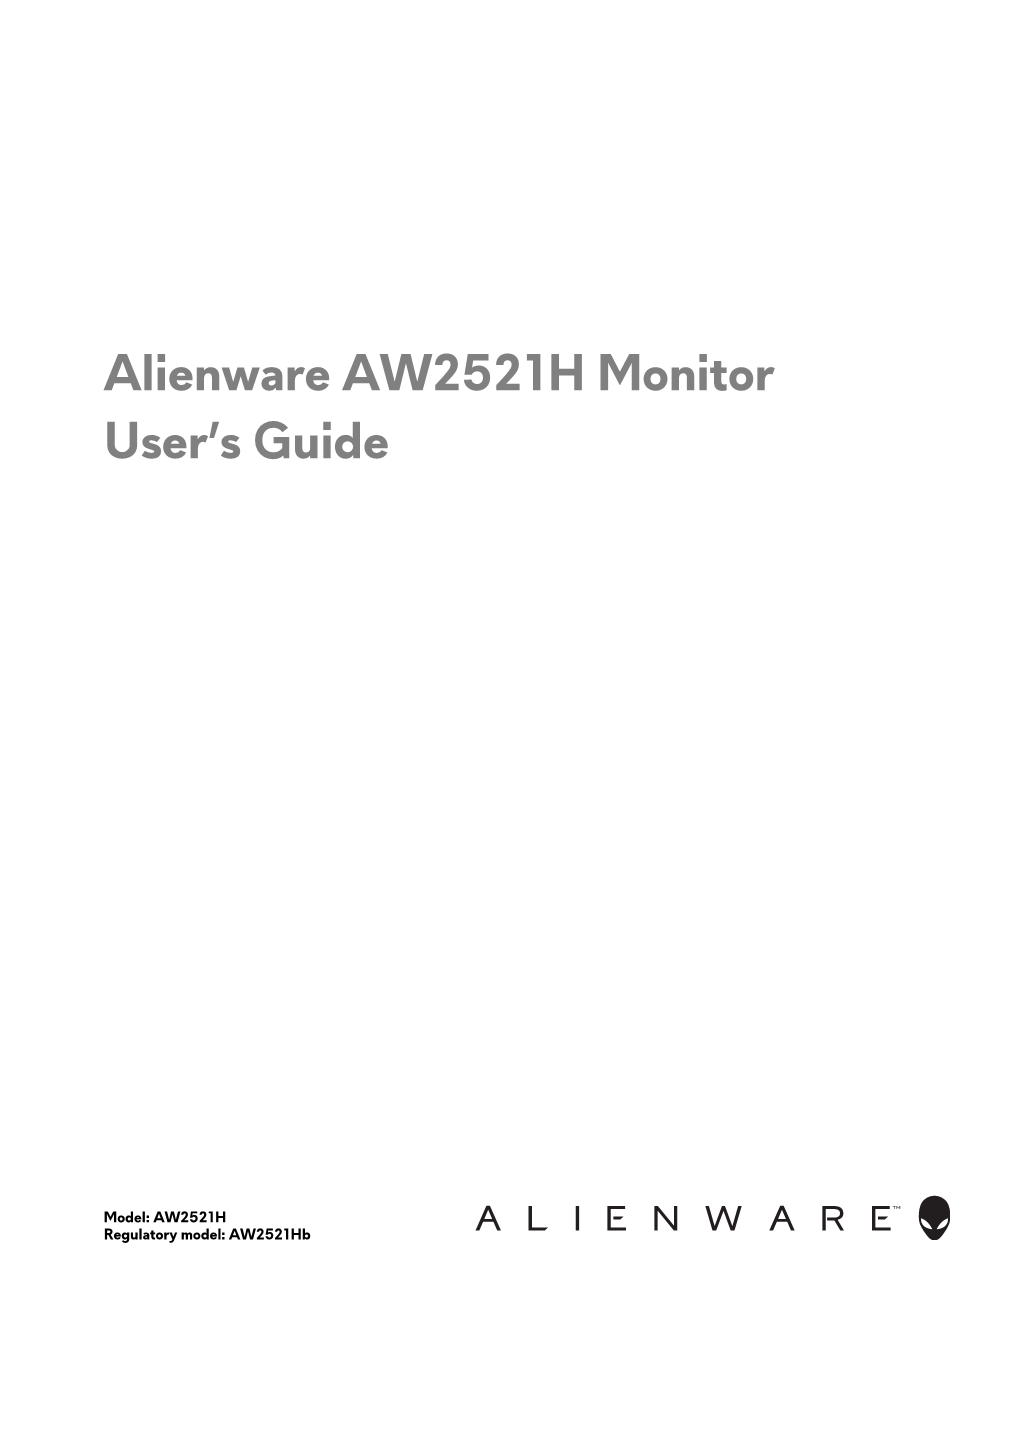 Alienware AW2521H Monitor User's Guide